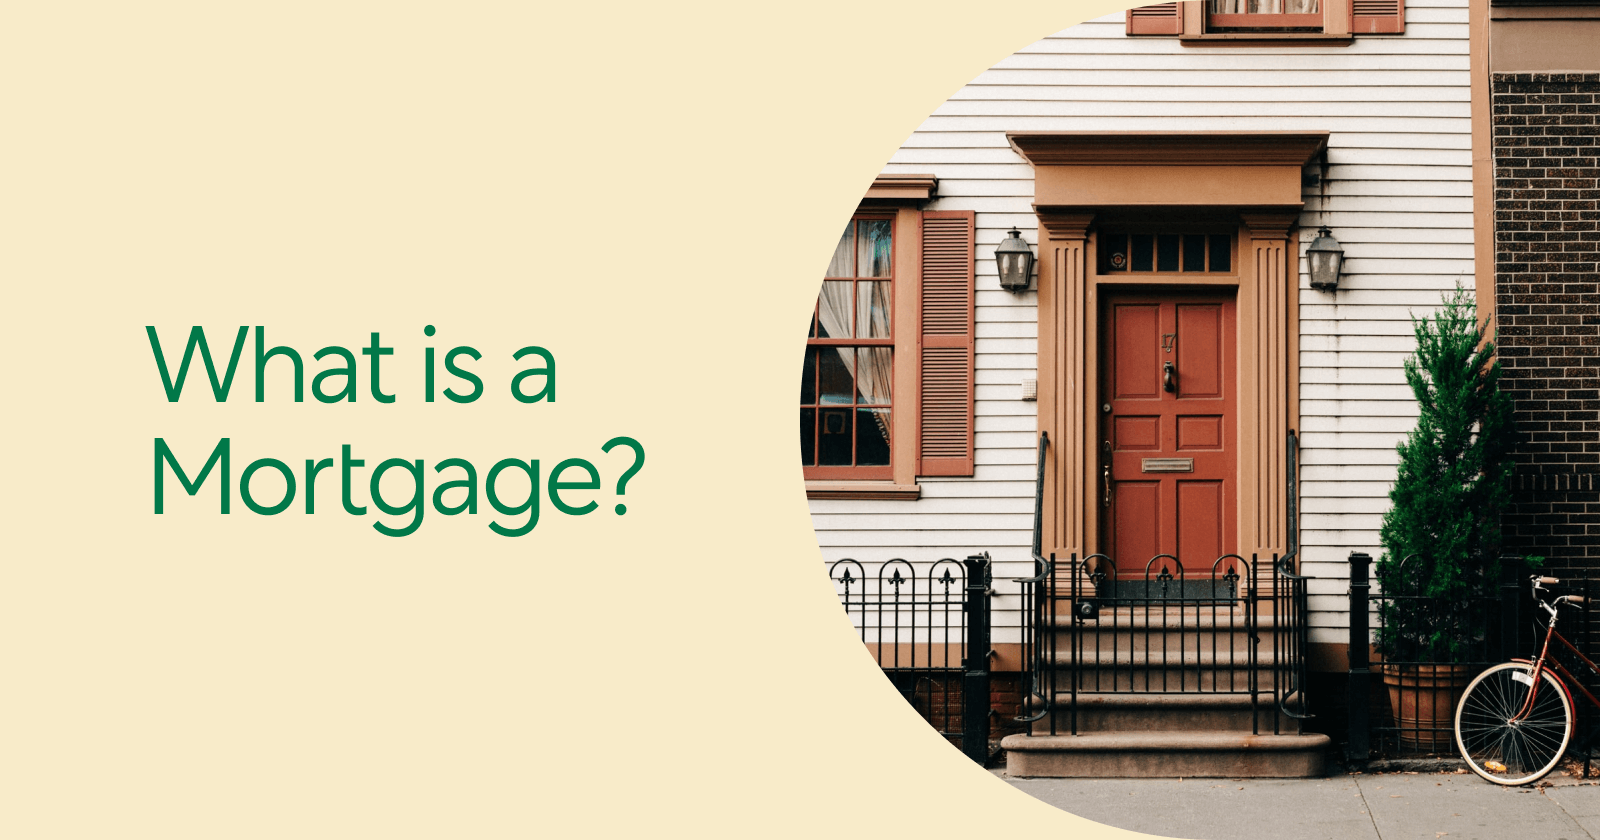 A Stylish Doorway of a Home and Complimentary Text that Says: What is a Mortgage?